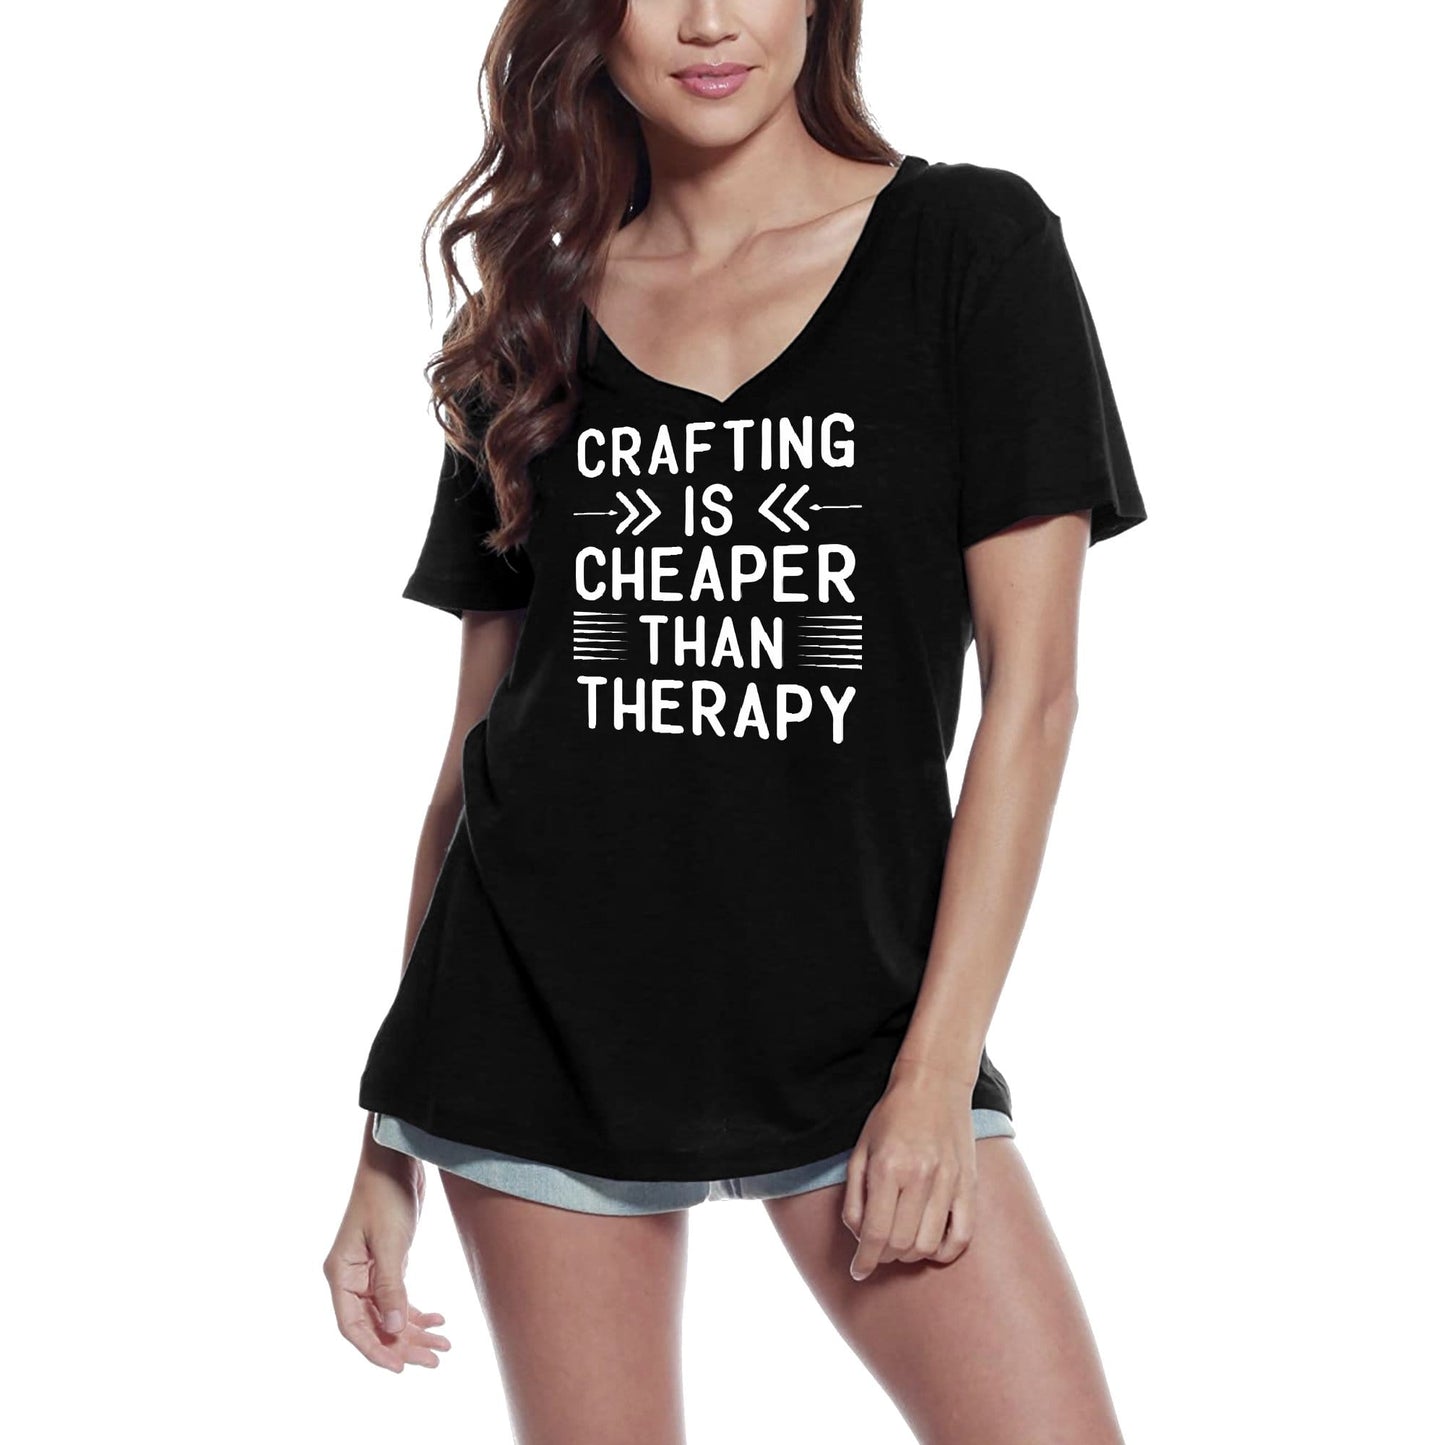 ULTRABASIC Women's T-Shirt Crafting is Cheaper Than Therapy - Short Sleeve Tee Shirt Tops